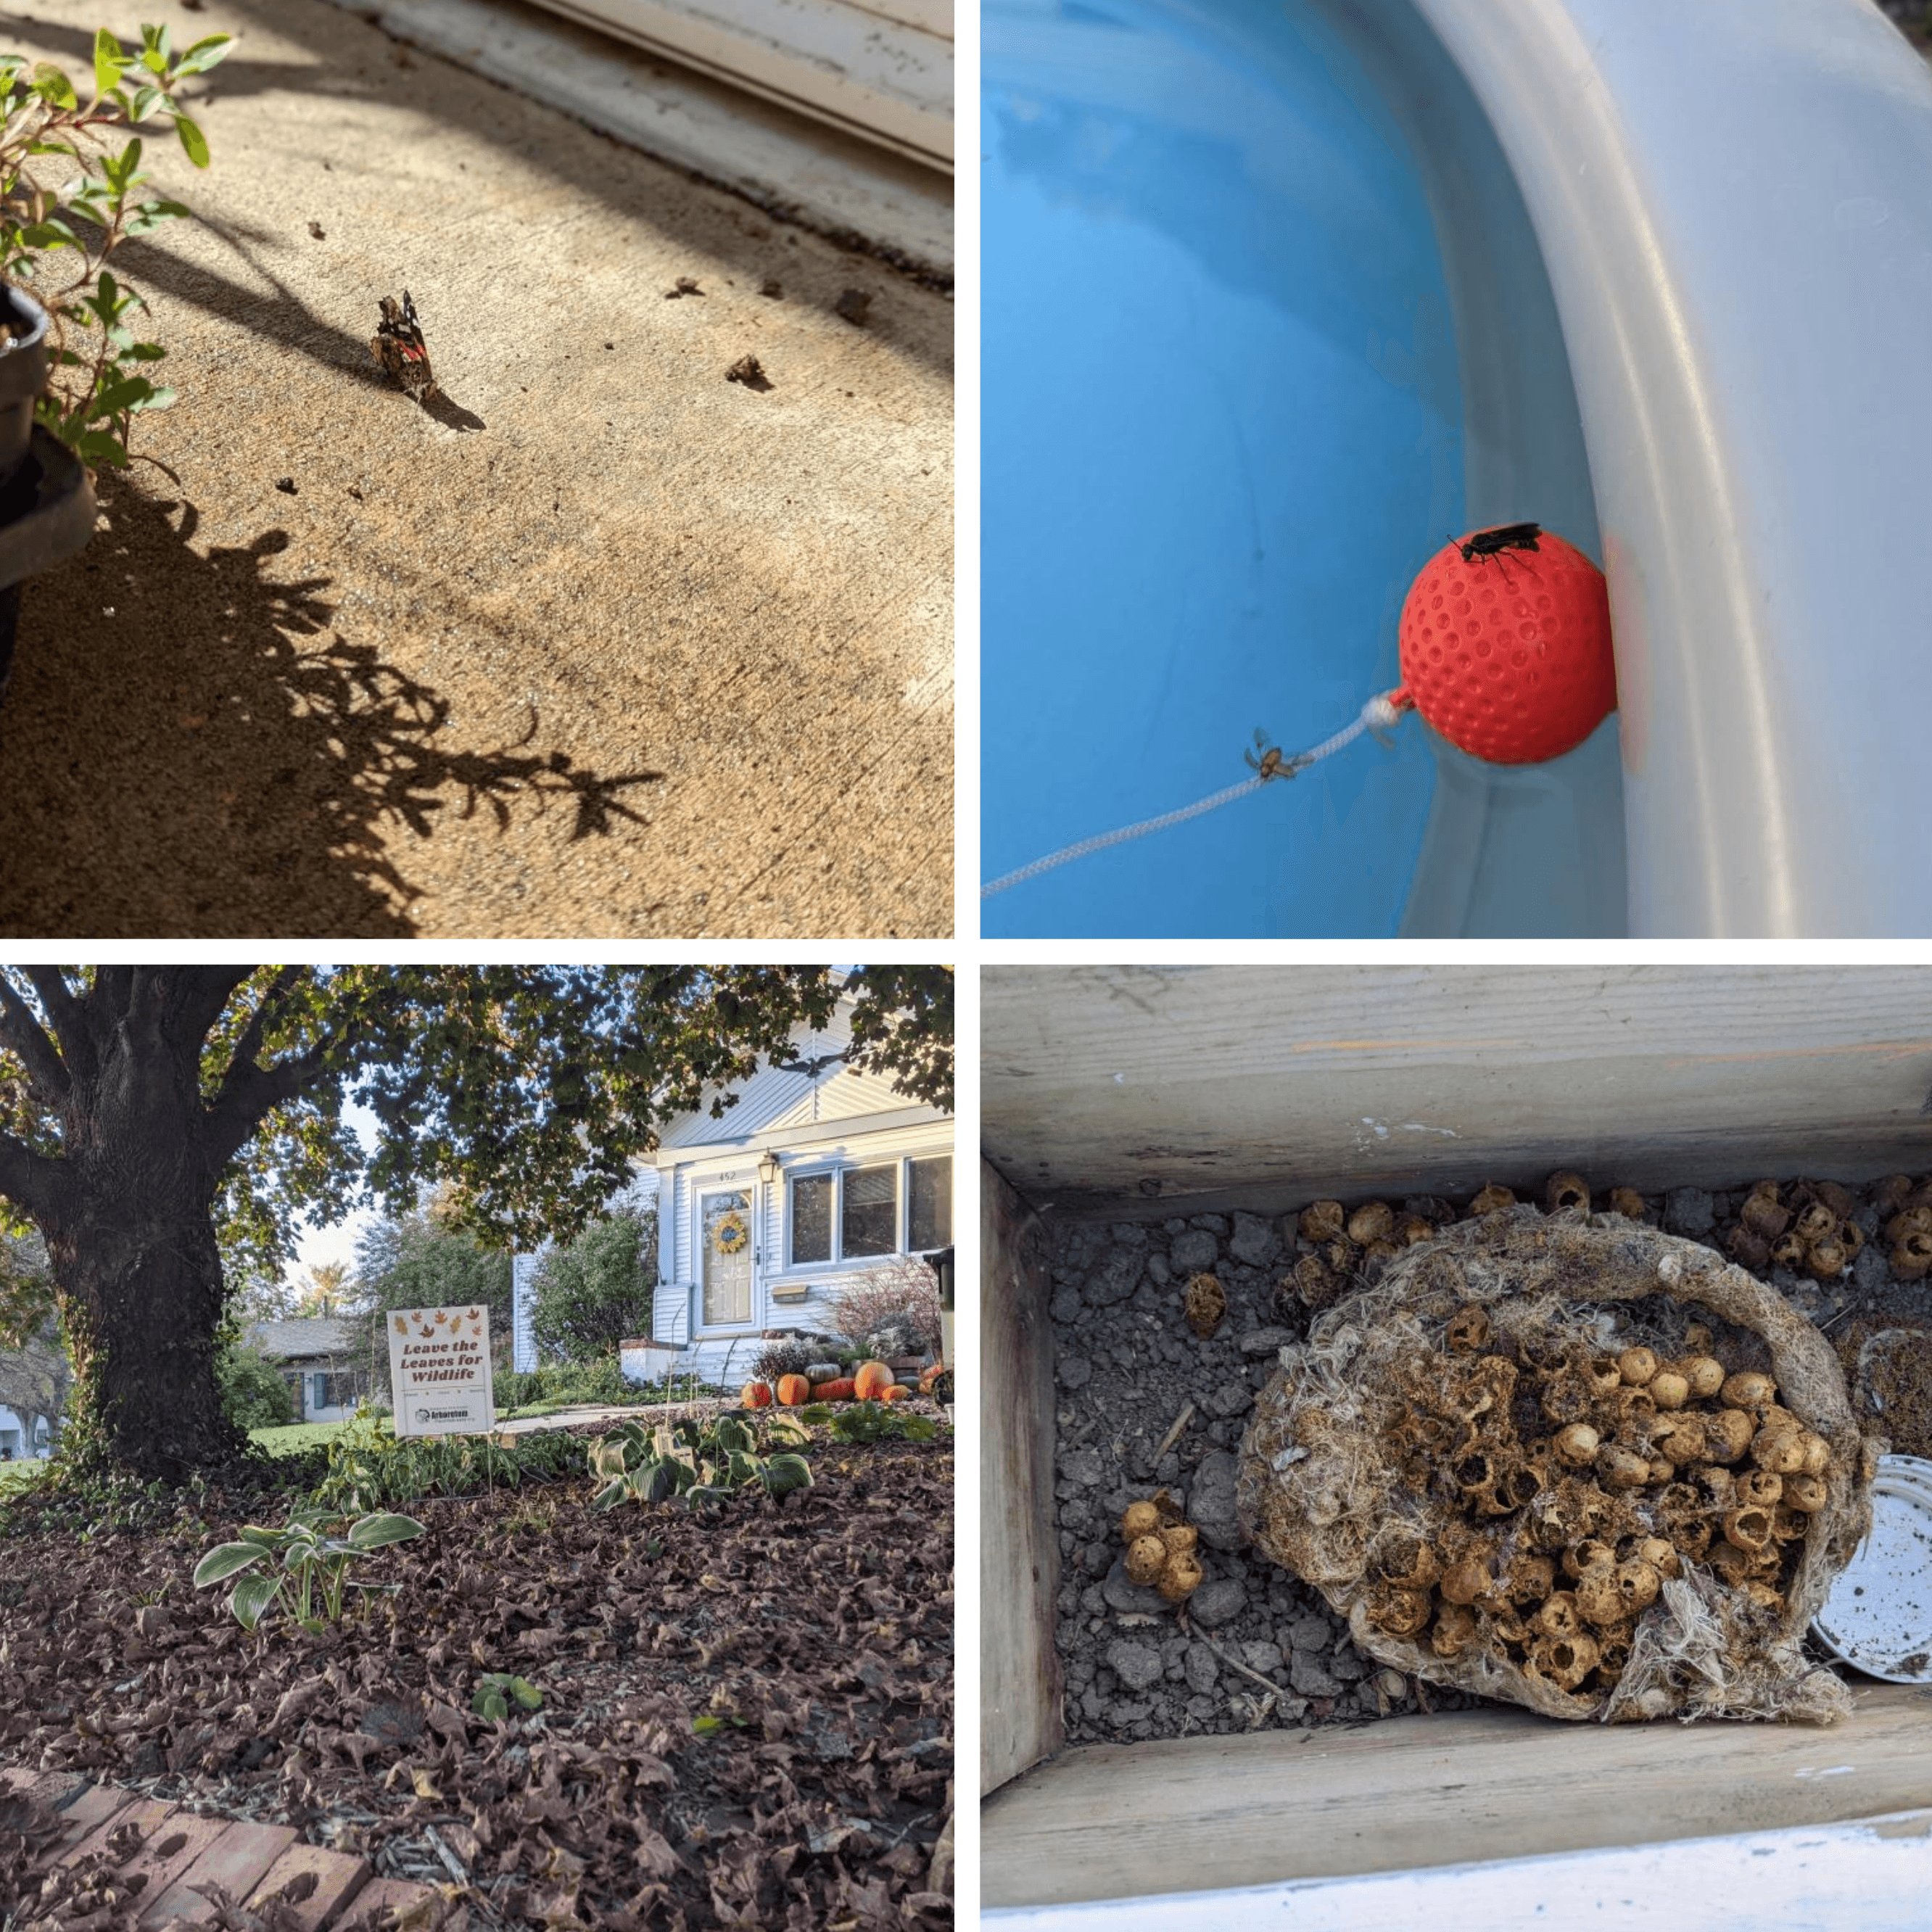 Butterfly drinking from the pores in concrete. Insects using floating pool toys to get a drink. Leave the Leaves signs help tell others what you're up to in your garden. Bumble Bee nest of empty honeypots.